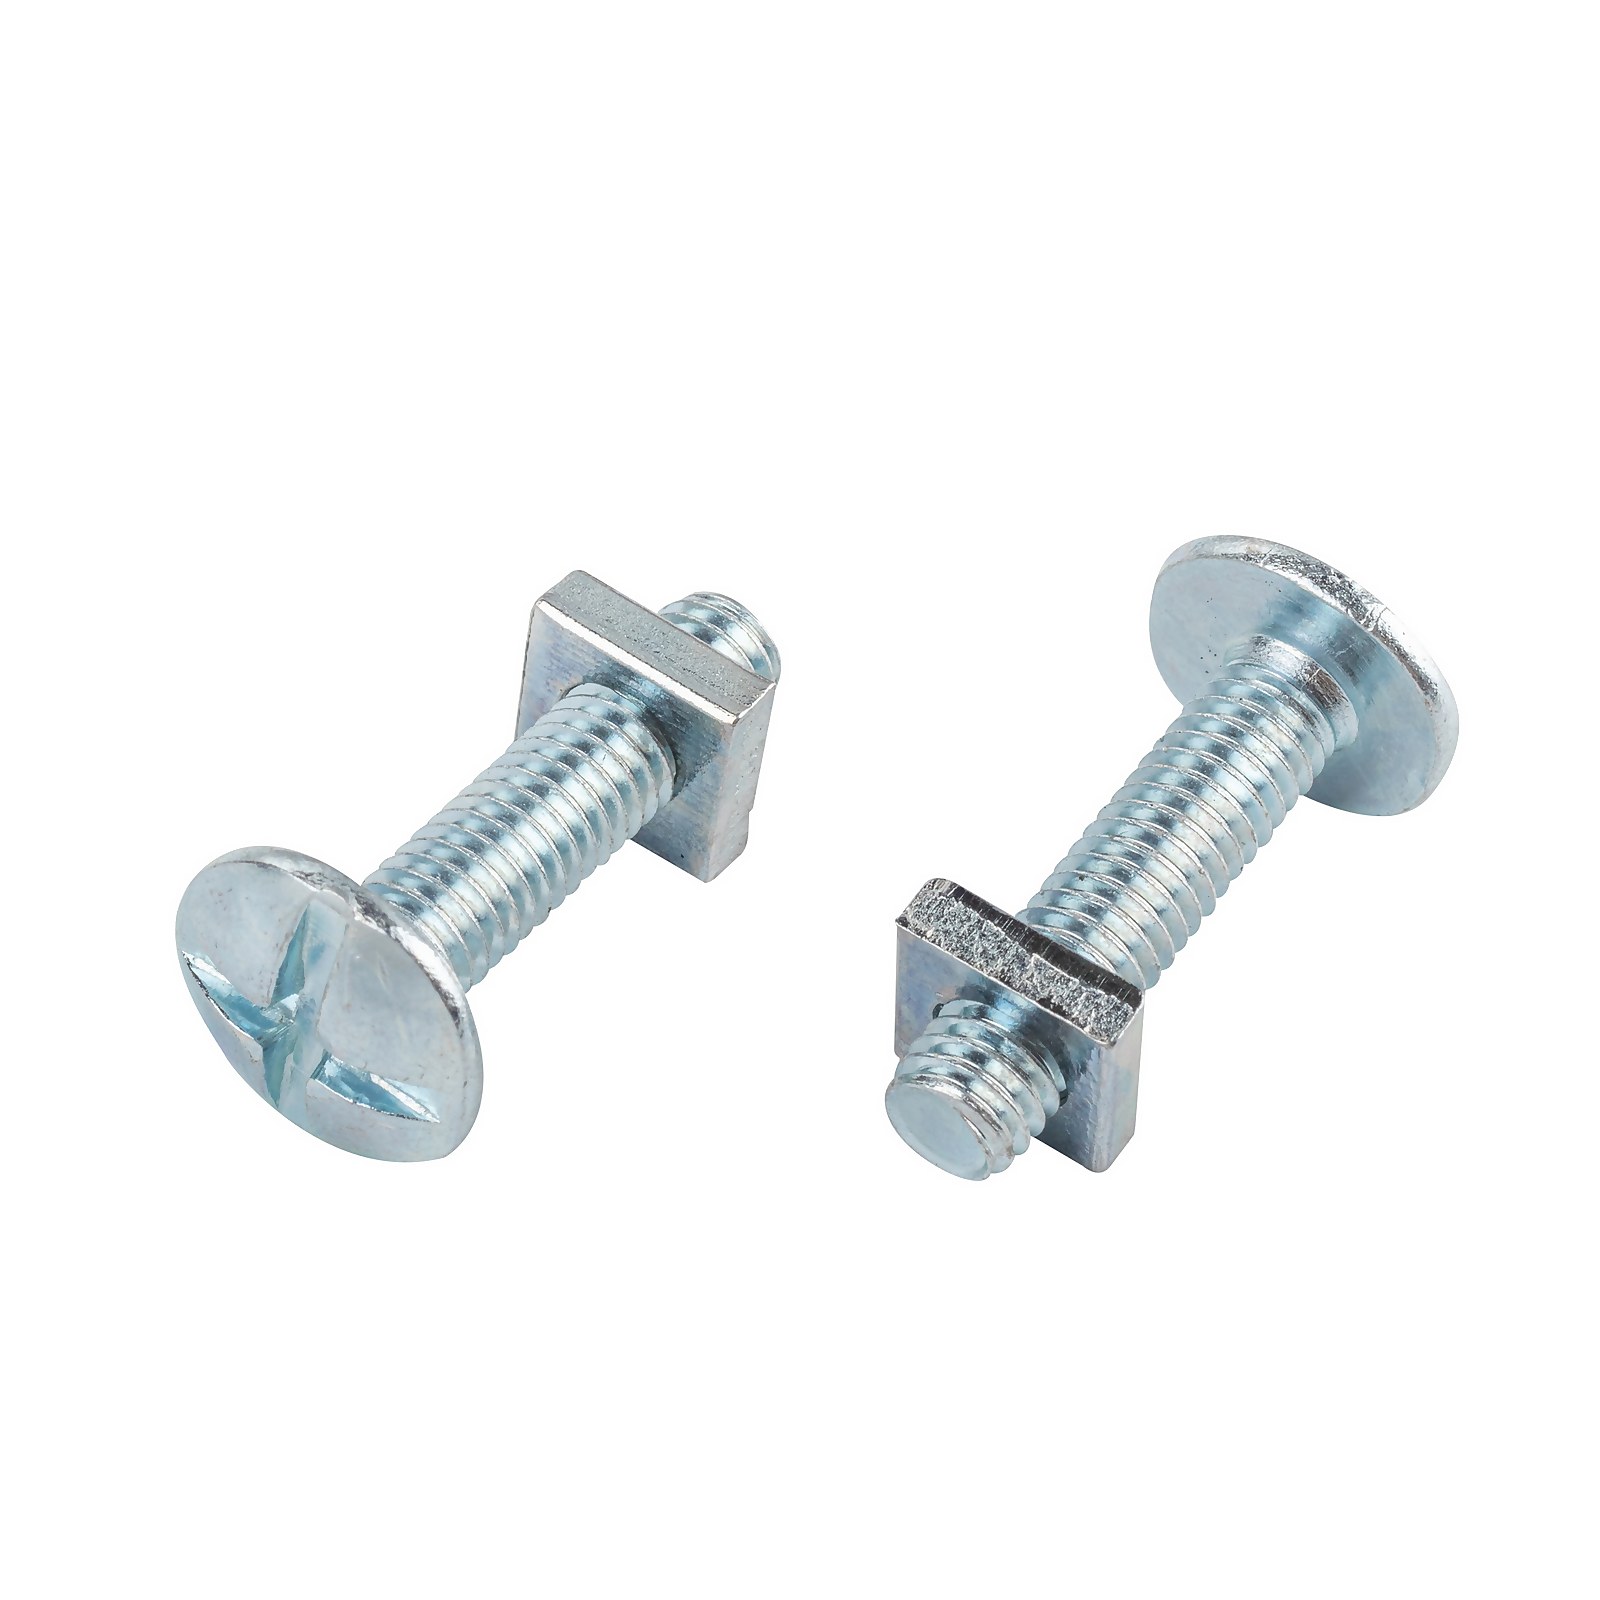 Photo of Homebase Zinc Plated Roof Bolt M6 25mm 10 Pack